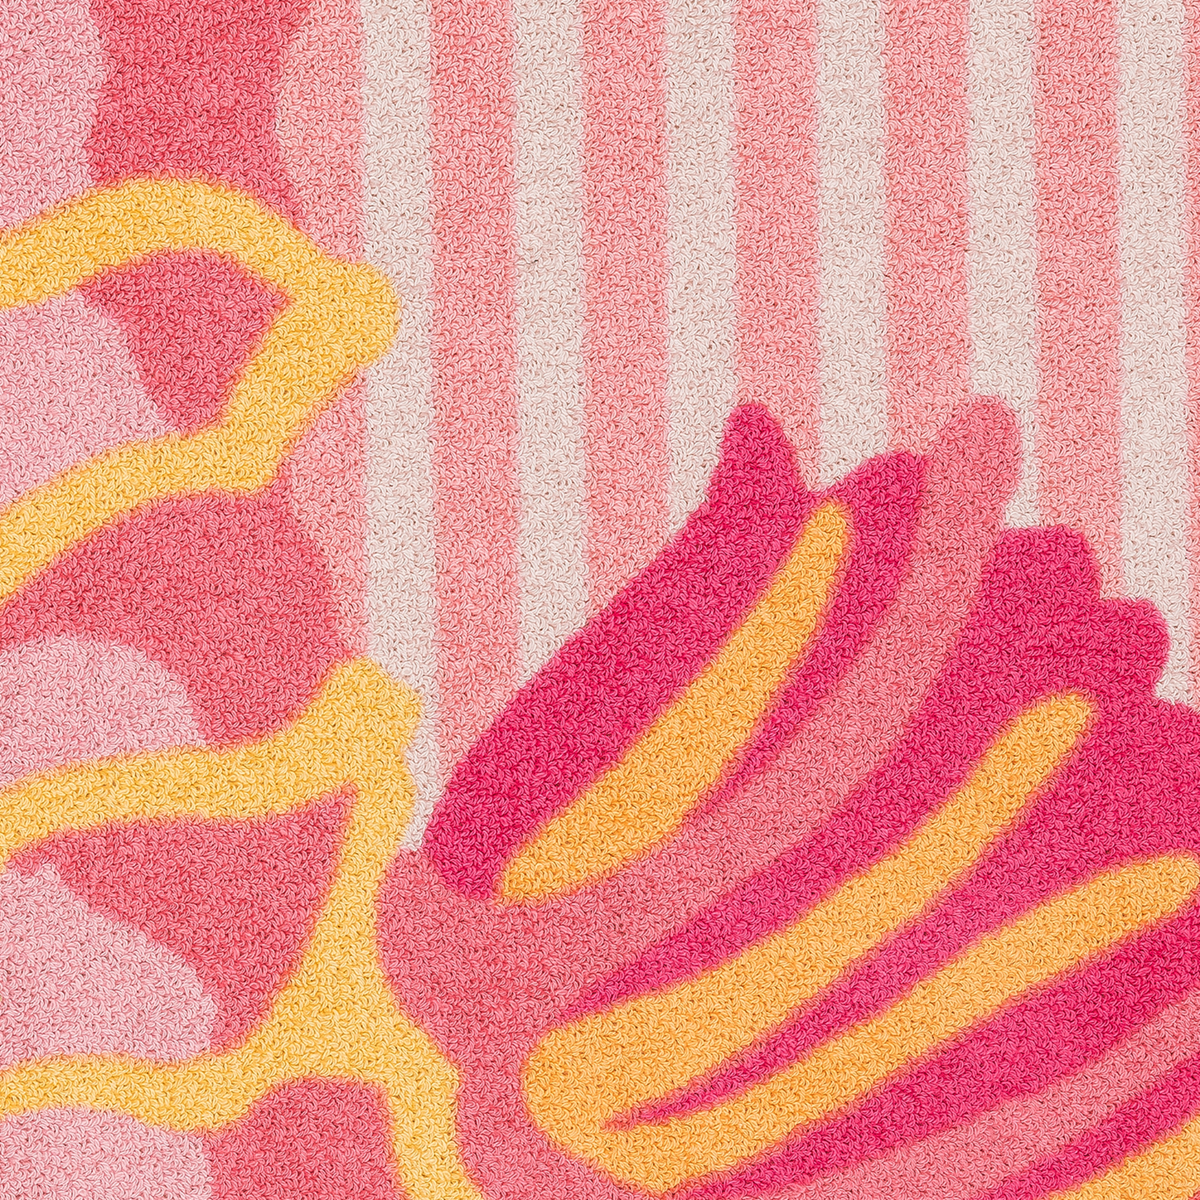 Fabric Sample of Matouk Schumacher Seahorse Beach Towels in Pink Coral Color